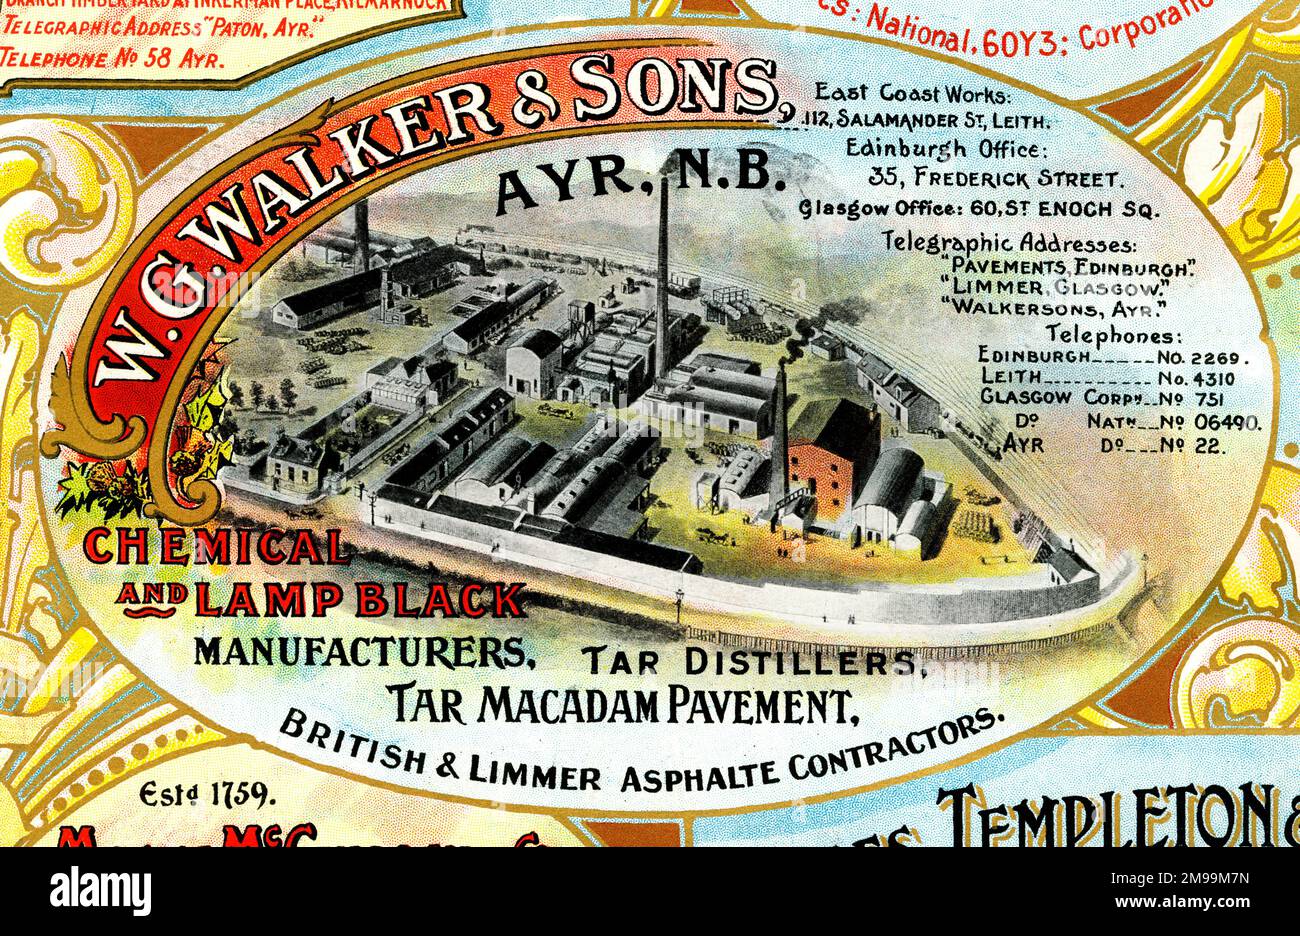 Annuncio per W G Walker & Sons, Chemical and Lamp Black Manufacturers, Ayr, Scozia. Foto Stock